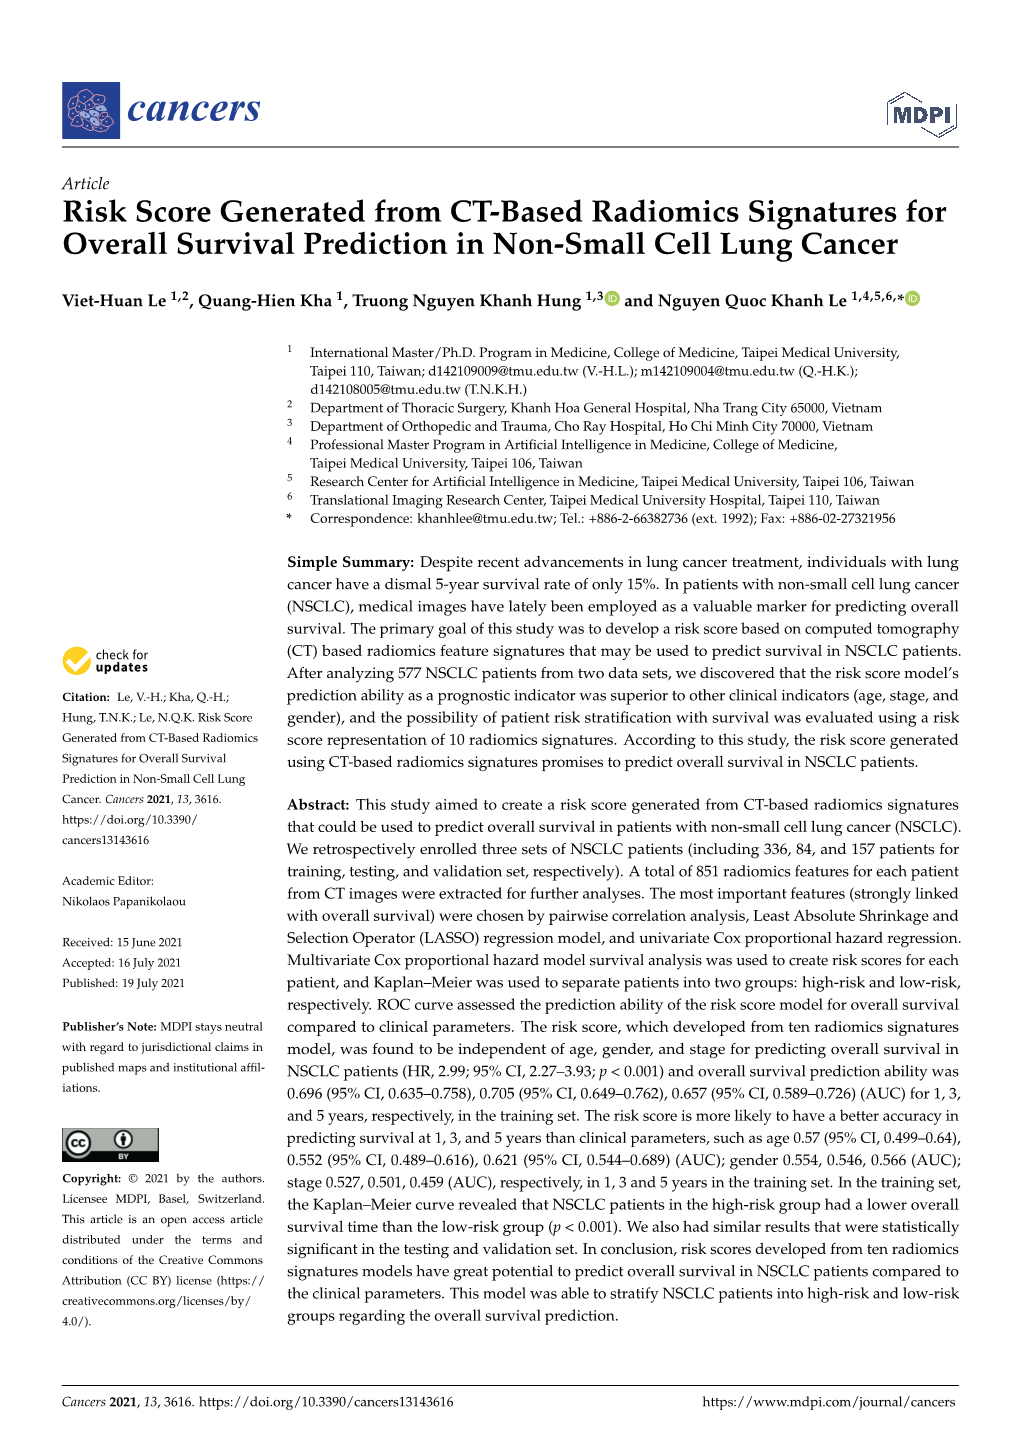 Risk Score Generated from CT-Based Radiomics Signatures for Overall Survival Prediction in Non-Small Cell Lung Cancer